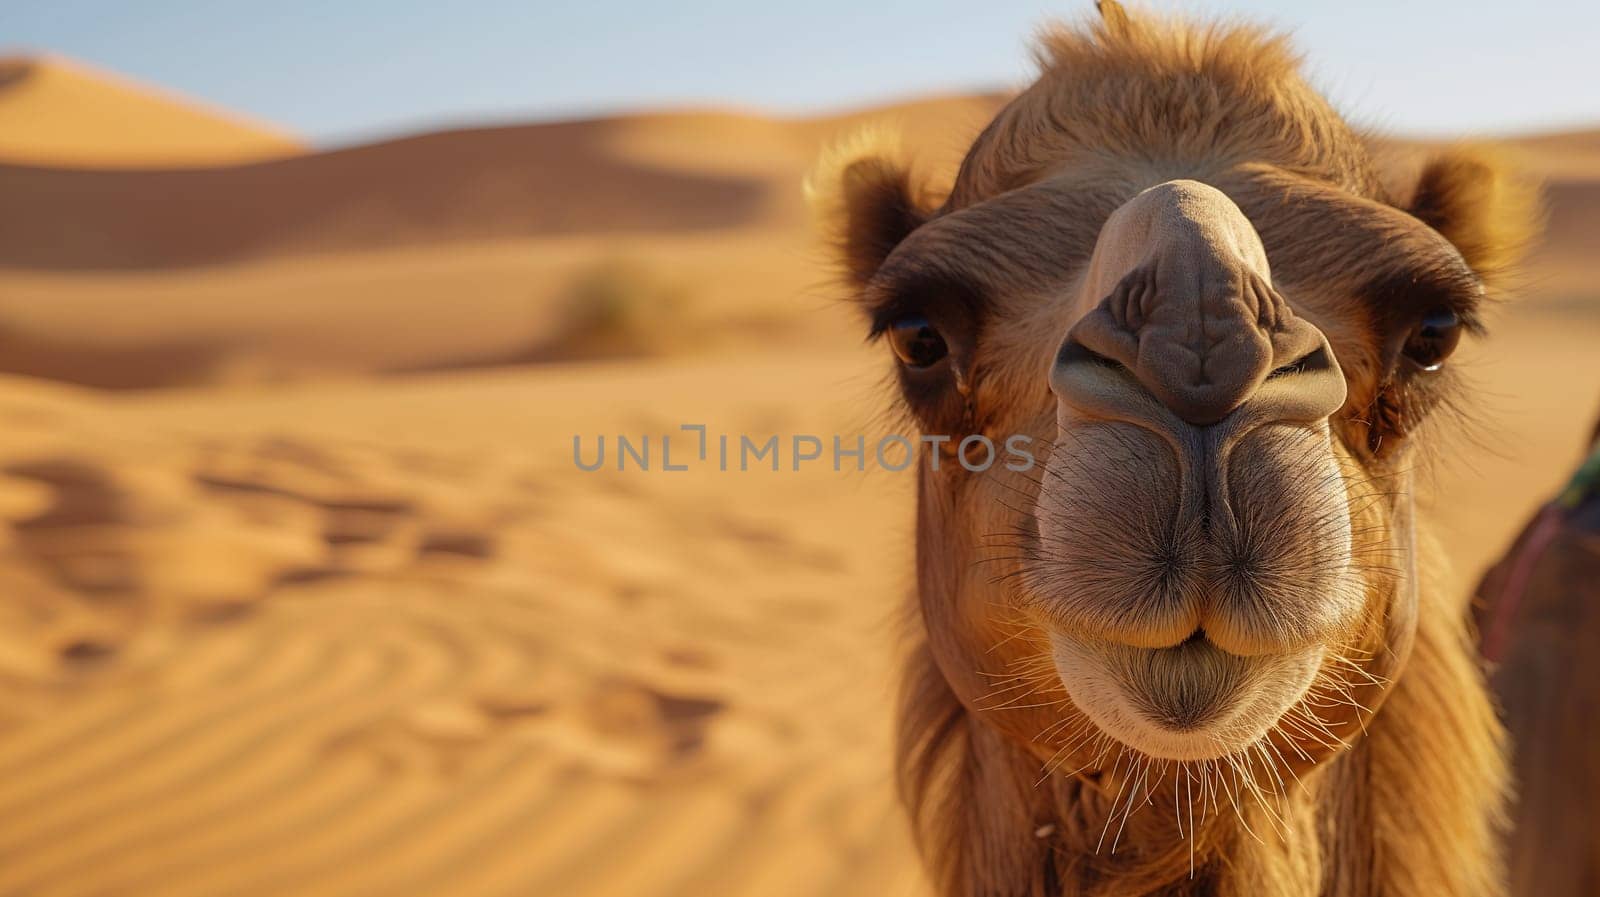 Close-Up of a Camel in the Desert at Sunset by chrisroll